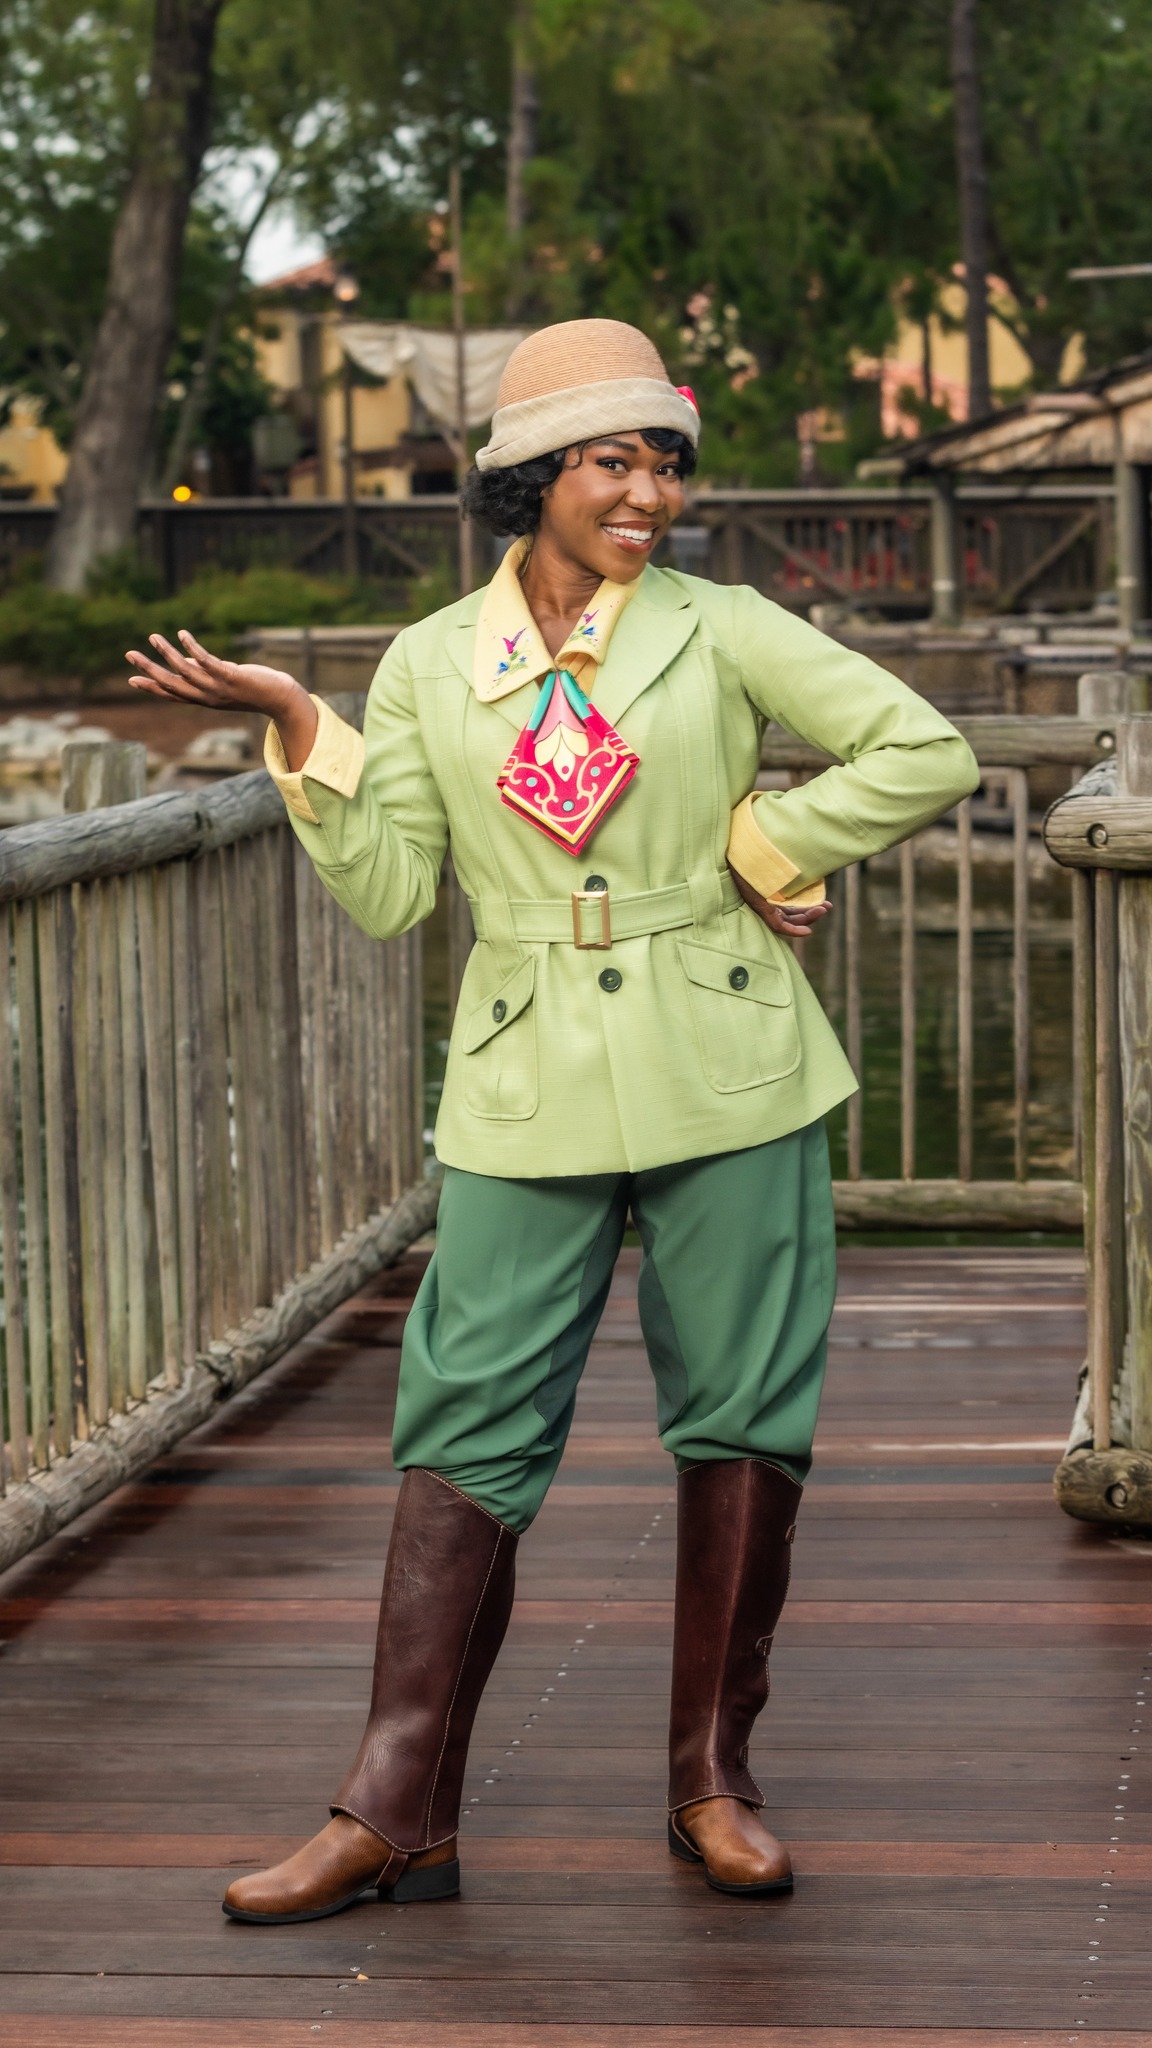 Tiana in Her New Costume for Tiana's Bayou Adventure